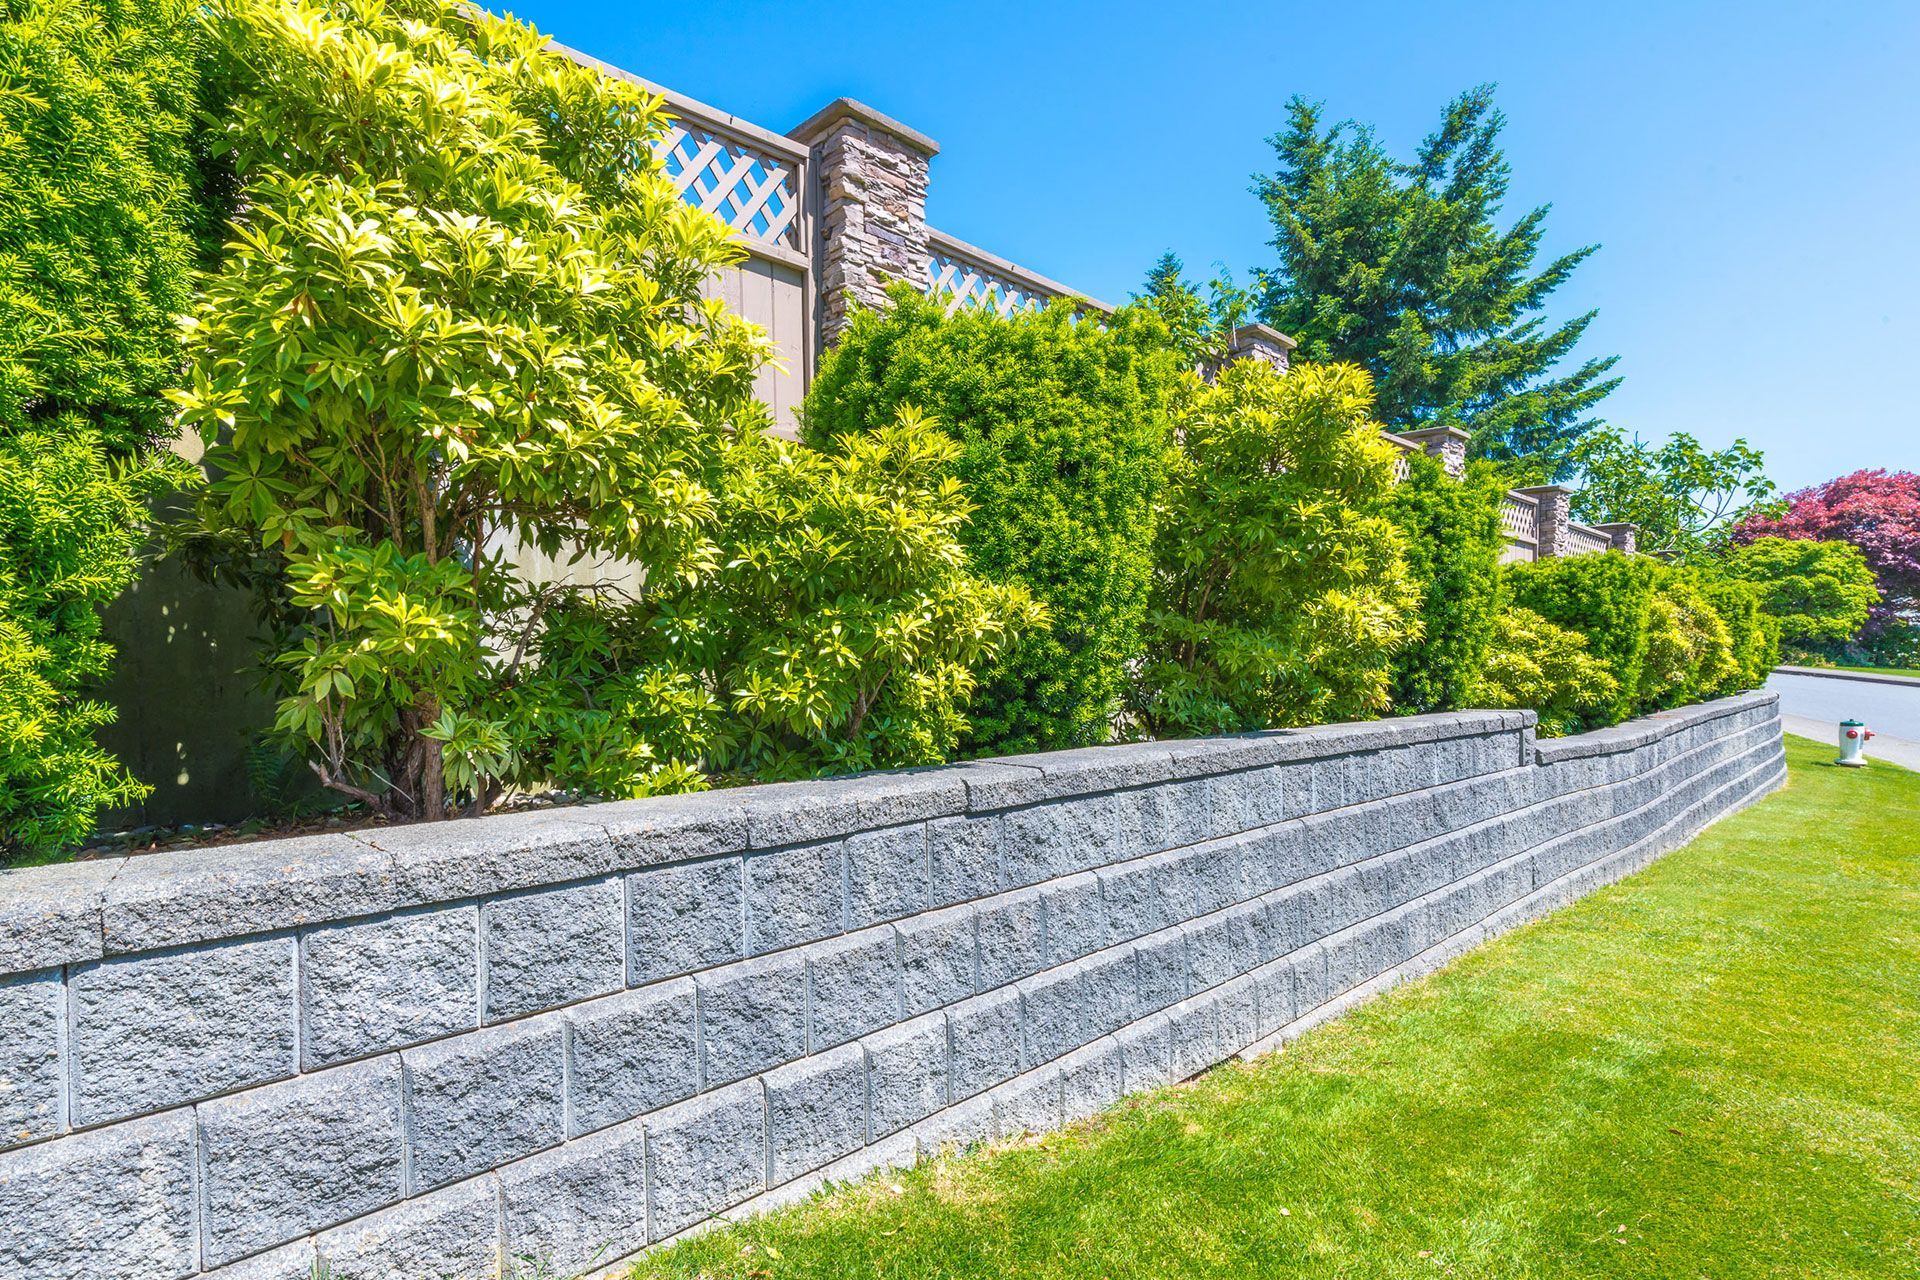 Retaining wall surrounded by trees and bushes in front of a house